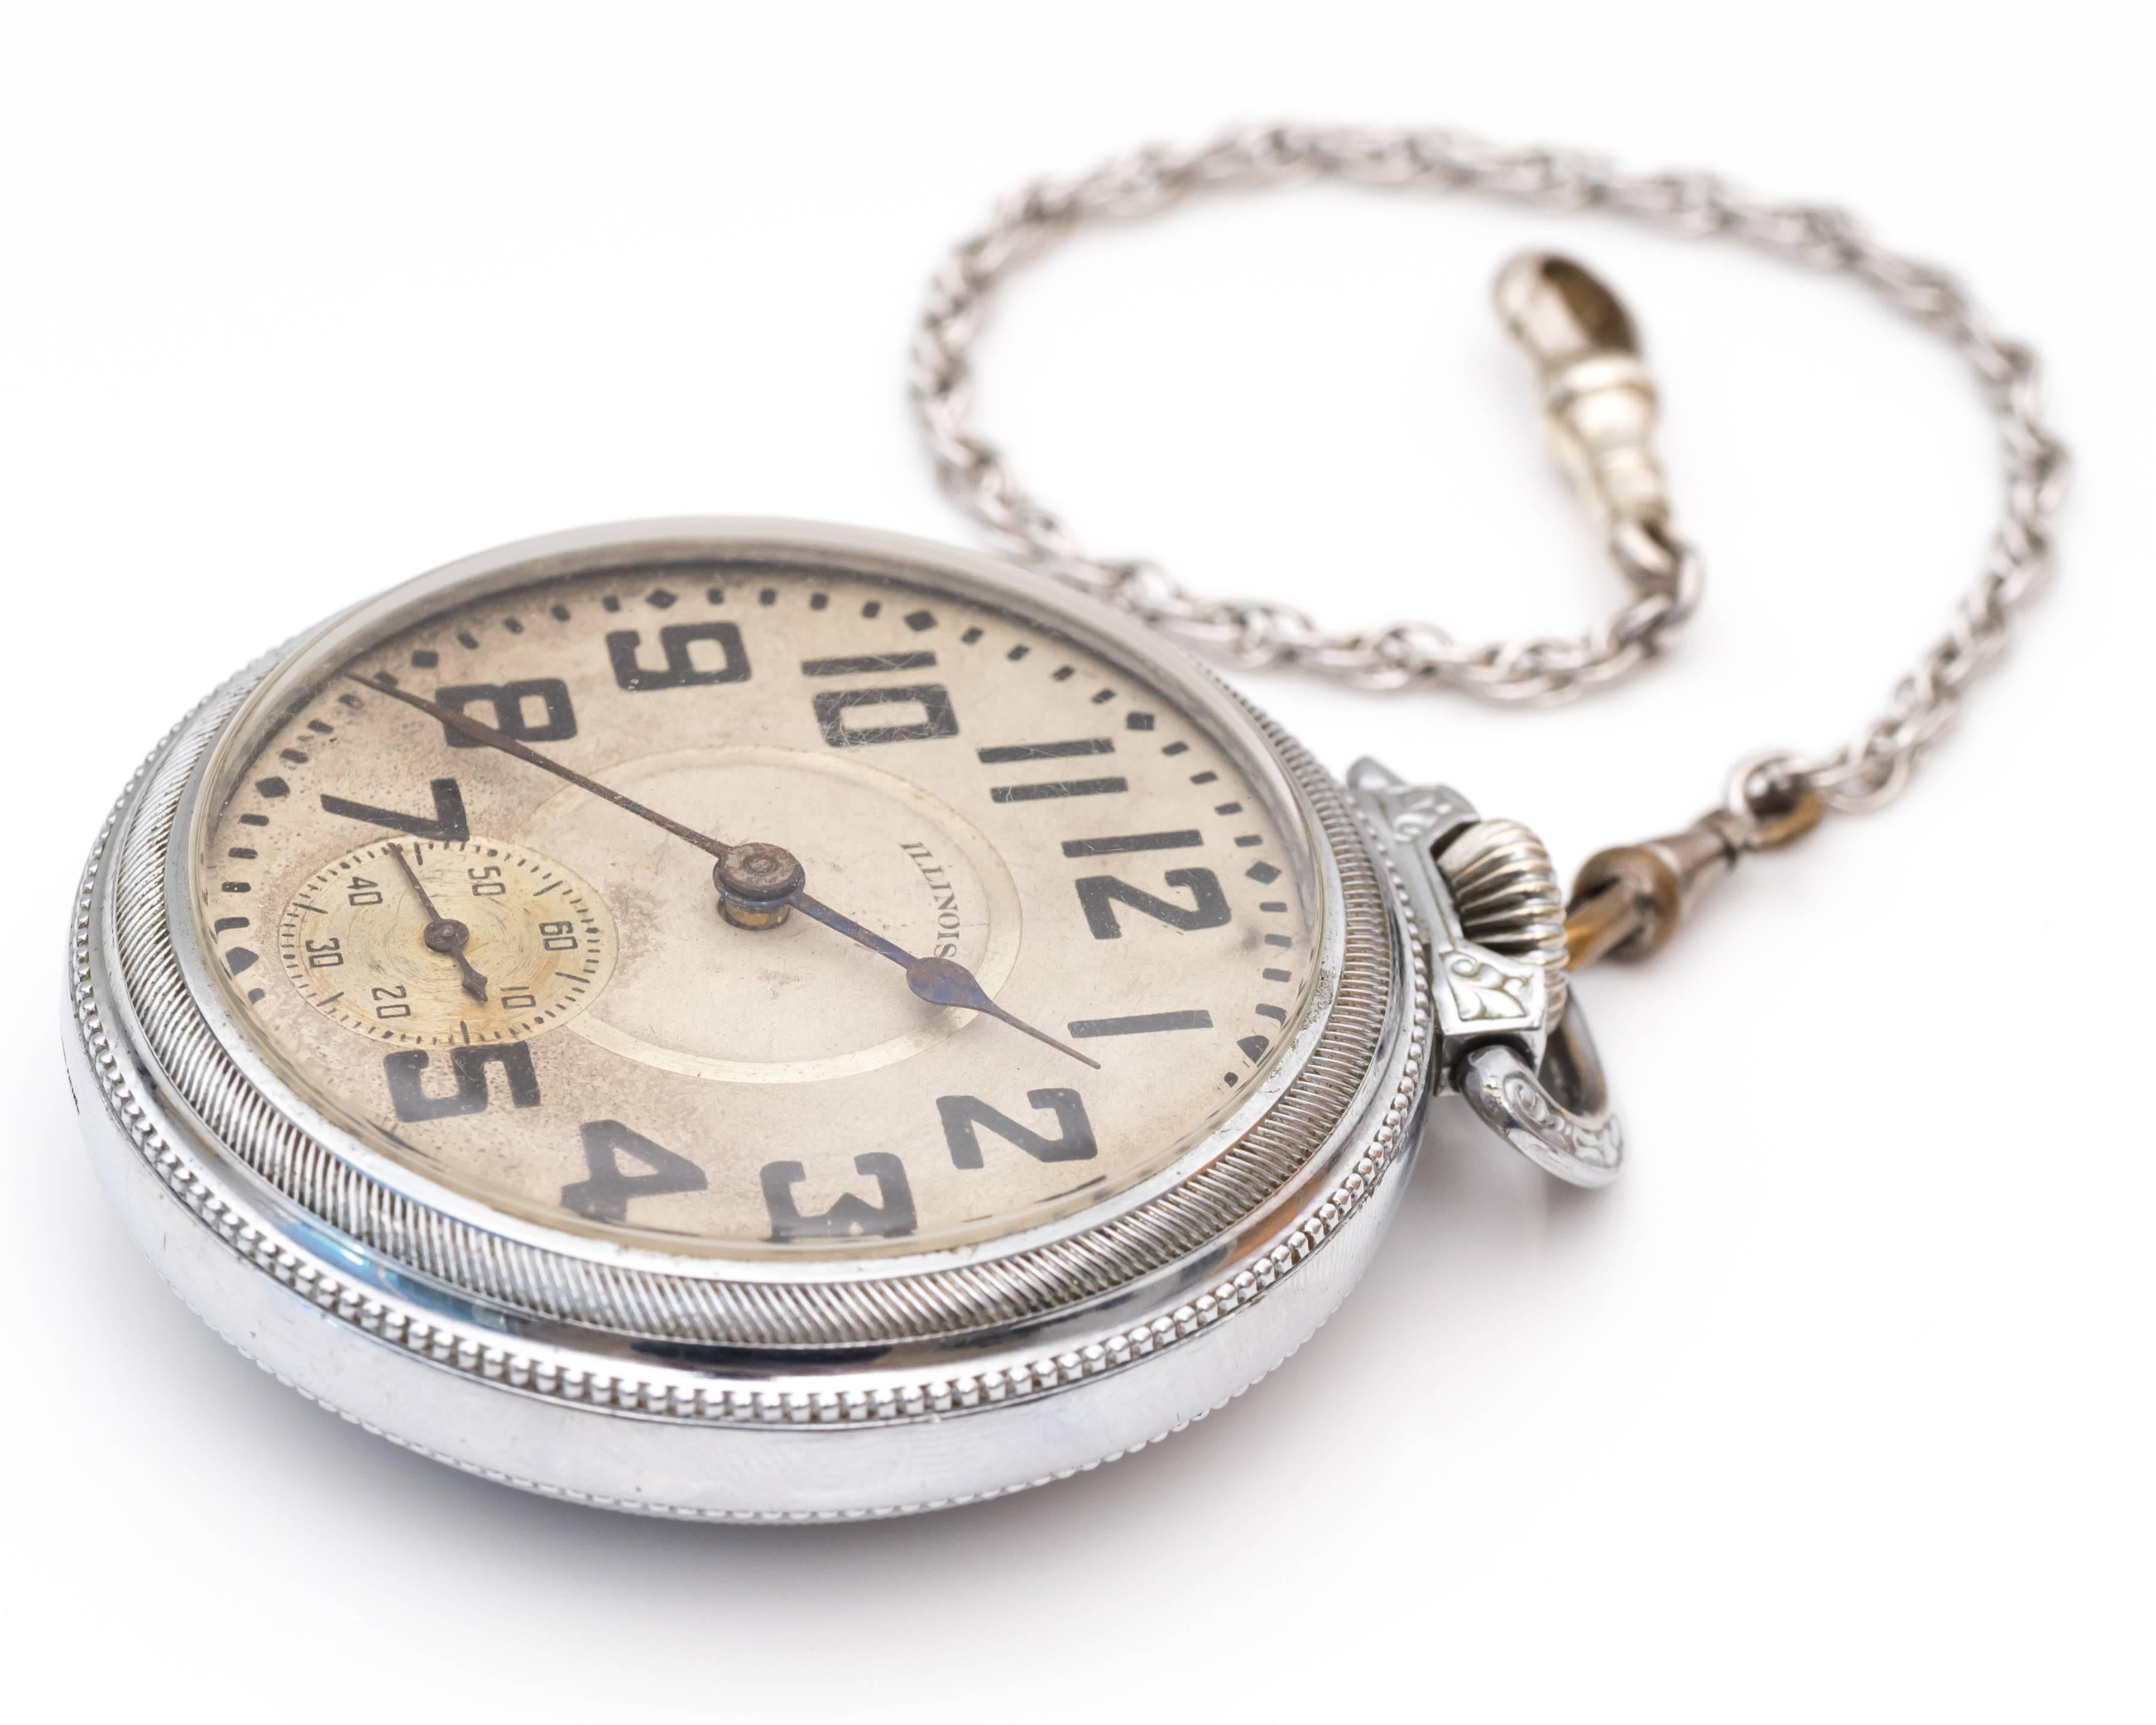 1900s Edwardian Illinois Railroad Stainless Steel Pocket Watch. A traditional railroad Illinois watch for collector's or users alike! The surface of the watch has numbers to indicate each marker except for the number 